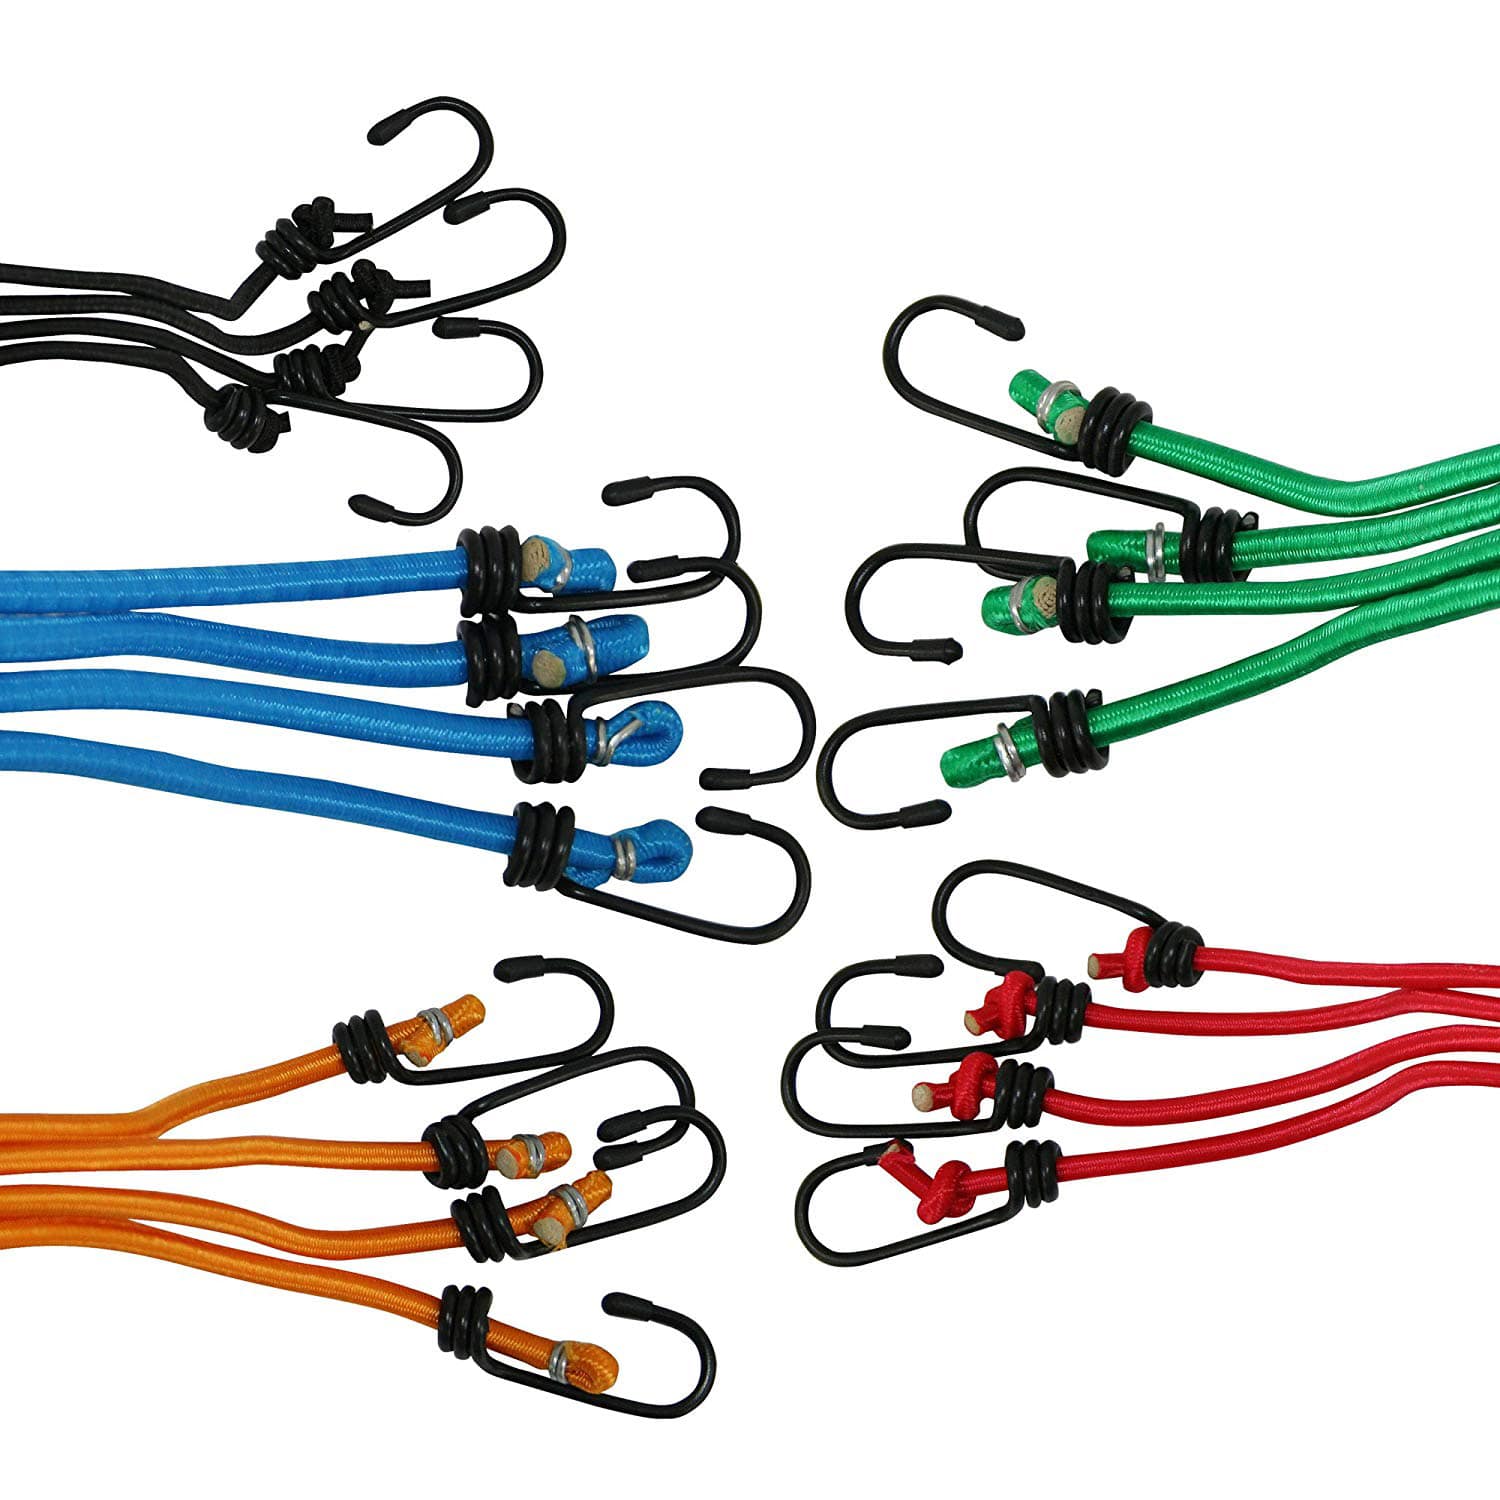 Top 10 Best Bungee Cords in 2020 Reviews | Buyer’s Guide - Top Product ...